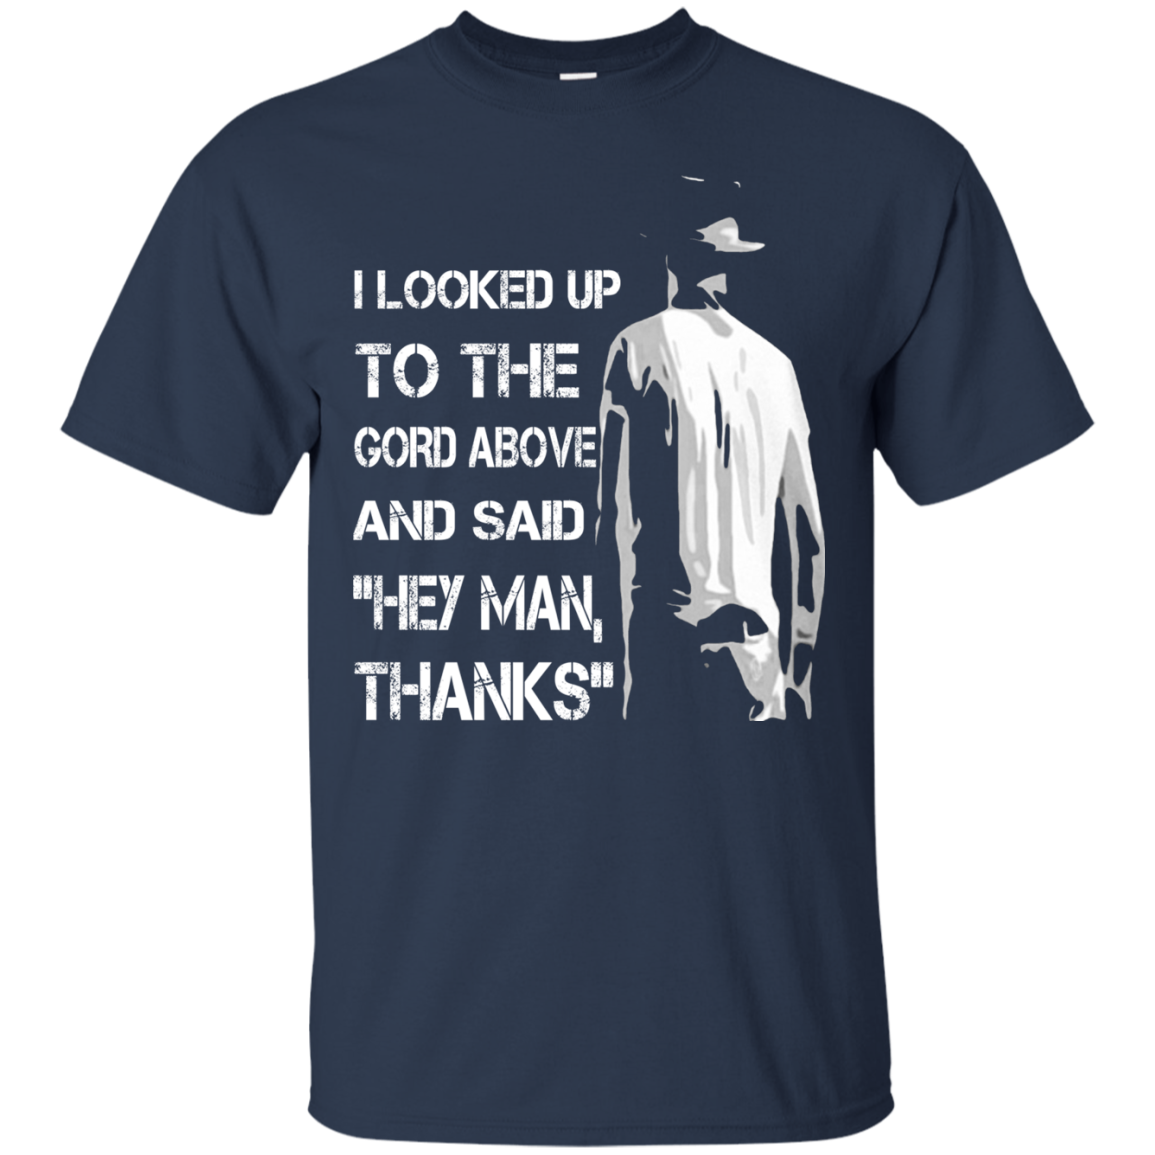 I looked Up To The Gord Above And Said Hey Man, Thanks T-shirt